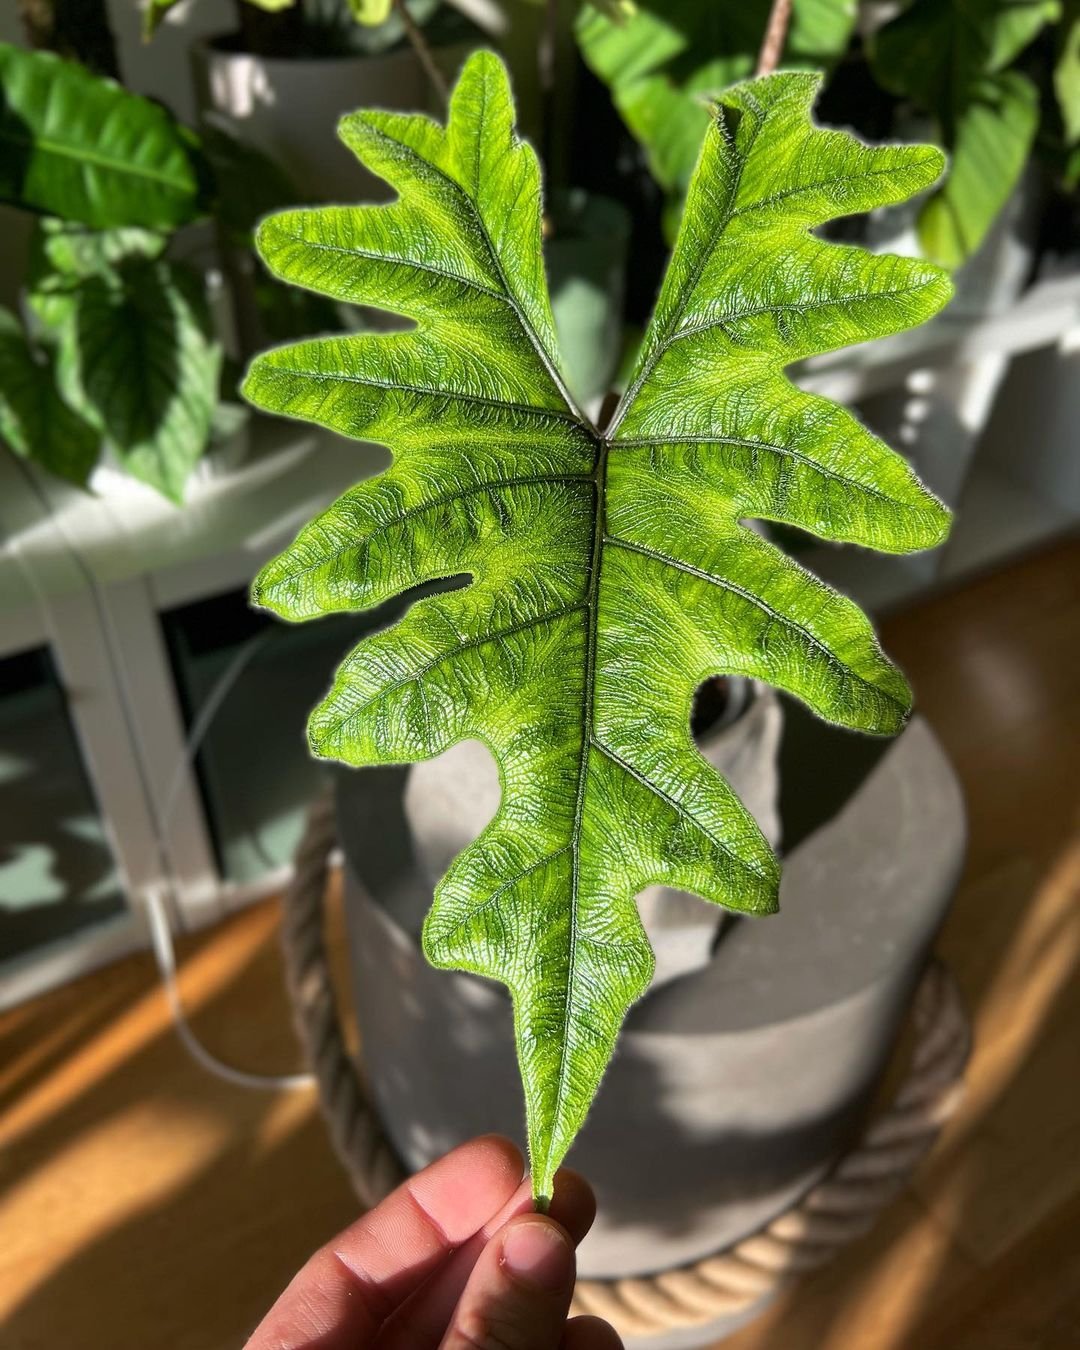 Alocasia Jacklyn: A vibrant green plant with large, heart-shaped leaves and prominent veins.

